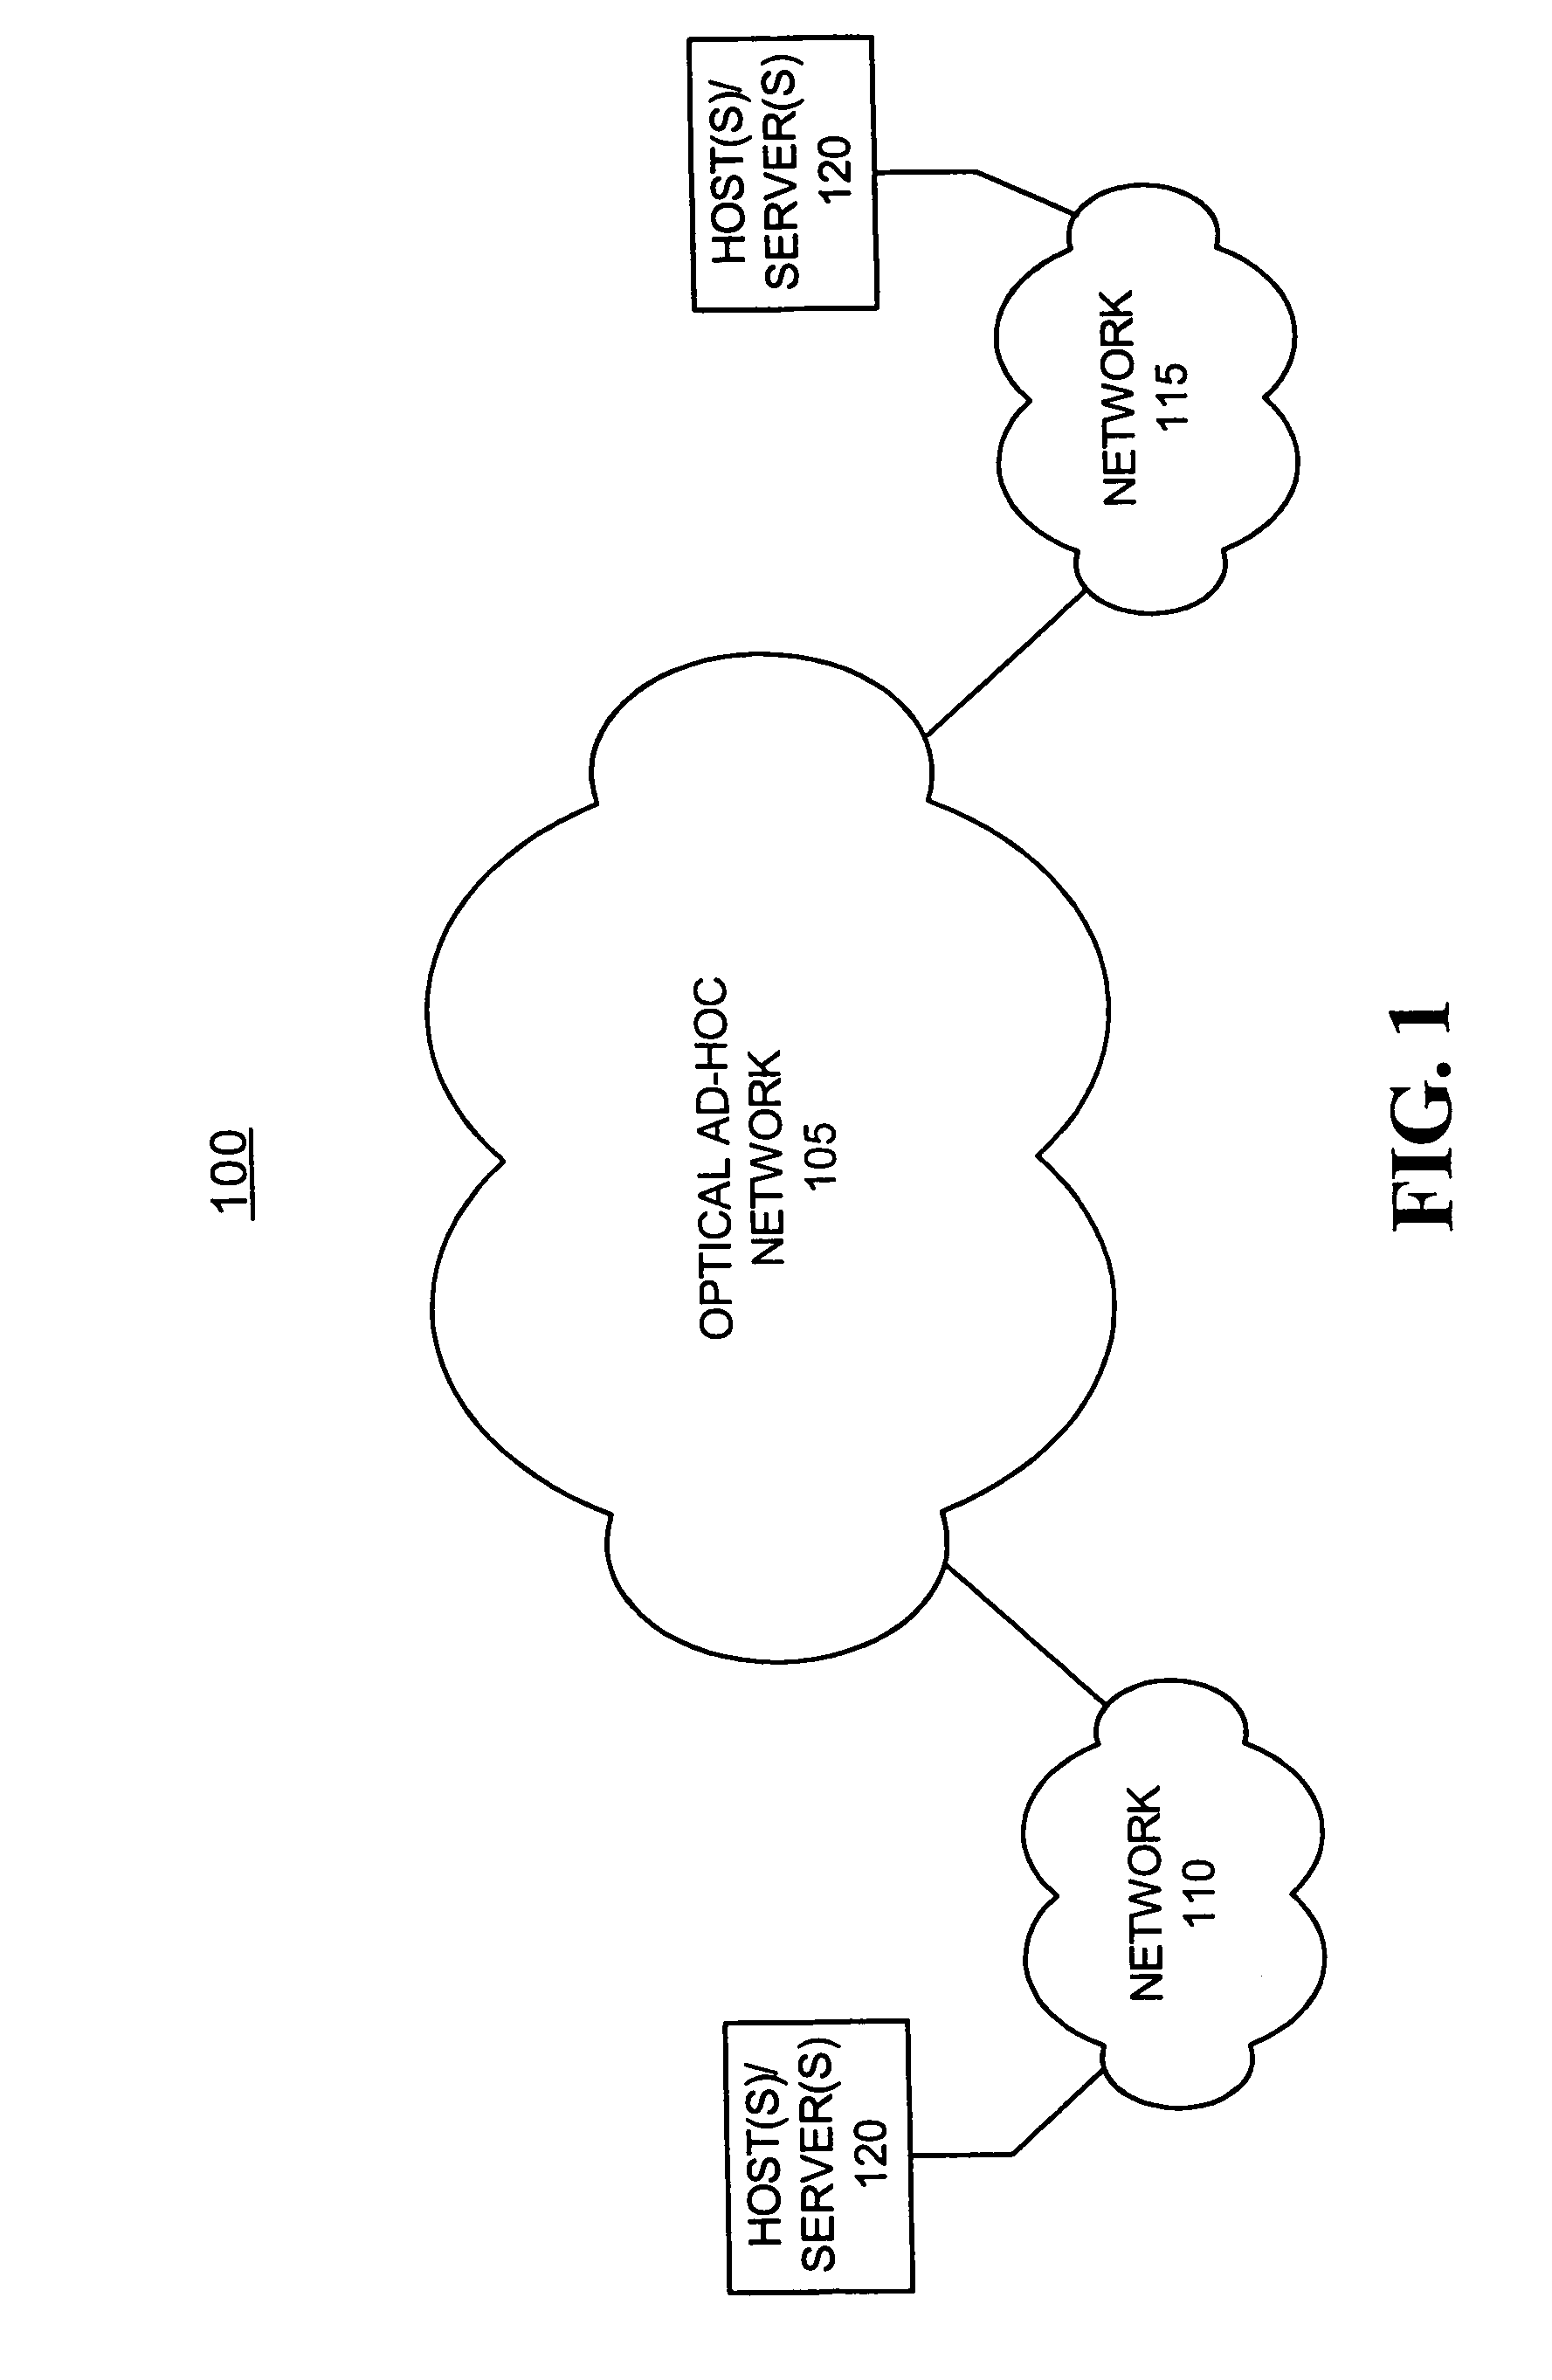 Systems and methods for implementing contention-based optical channel access